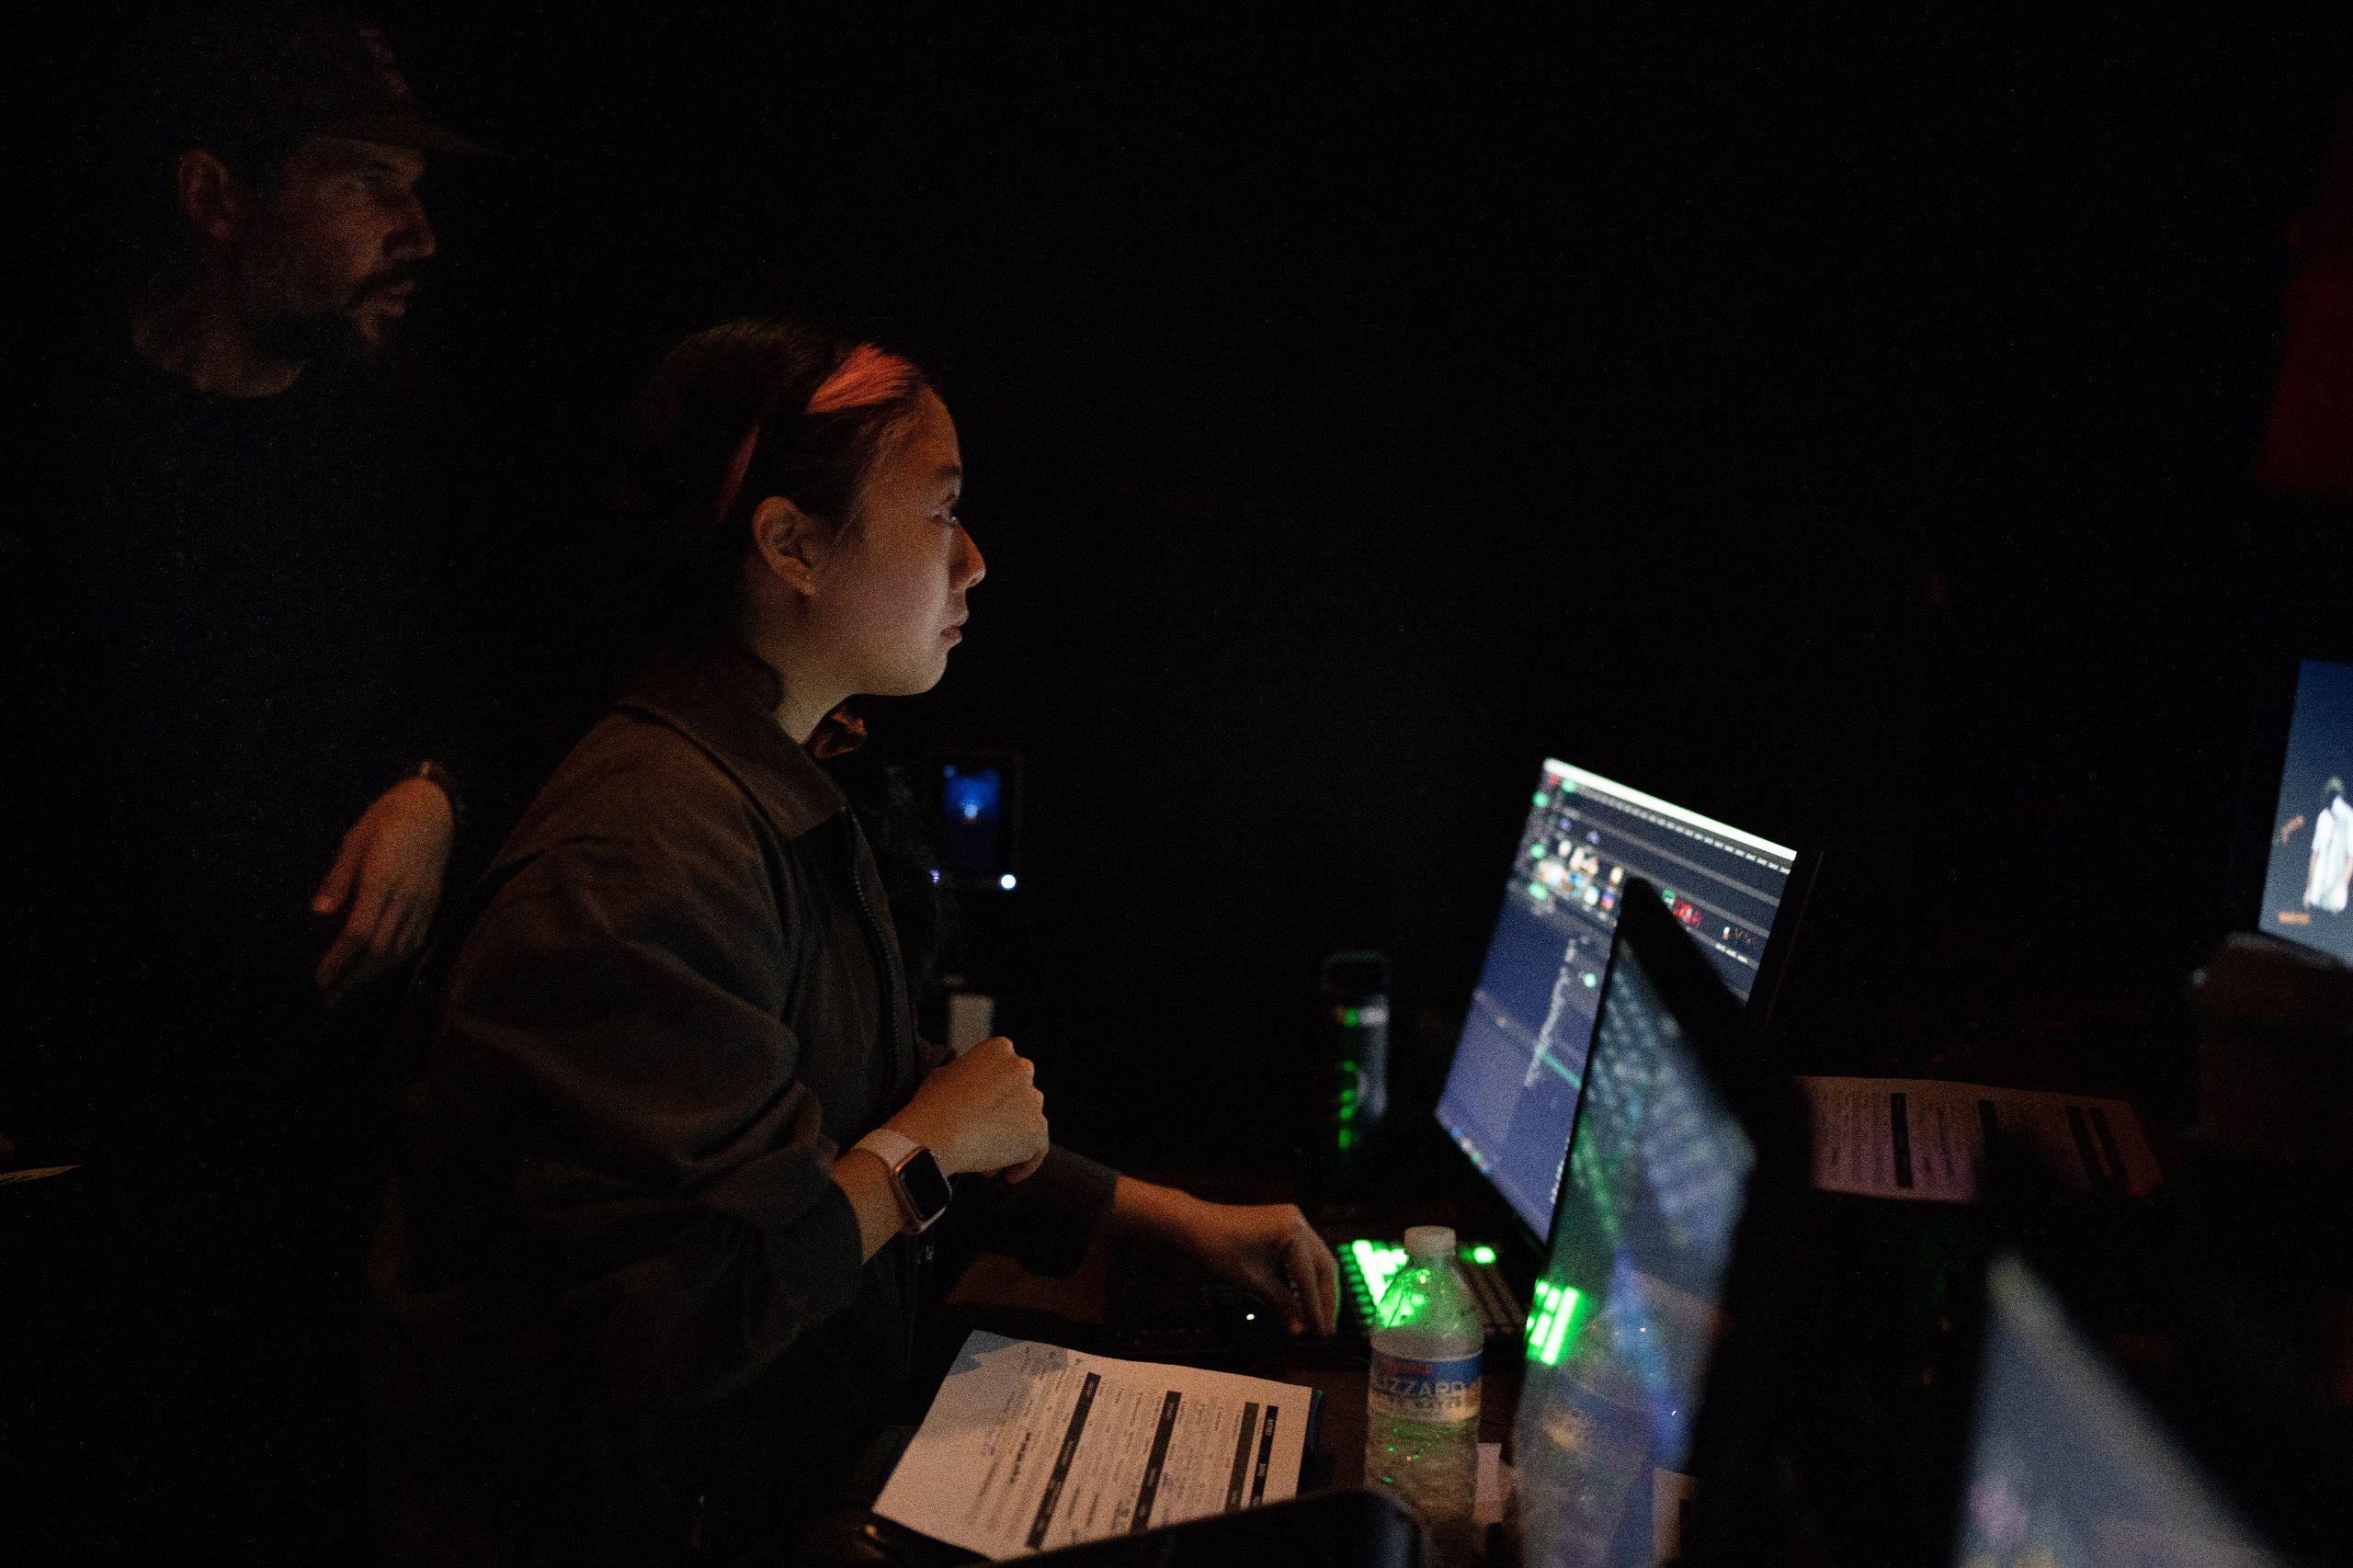 These days, Elicia is deeply involved in show production such as operating the video and lighting console backstage. (Credits: Ryan Nava)

